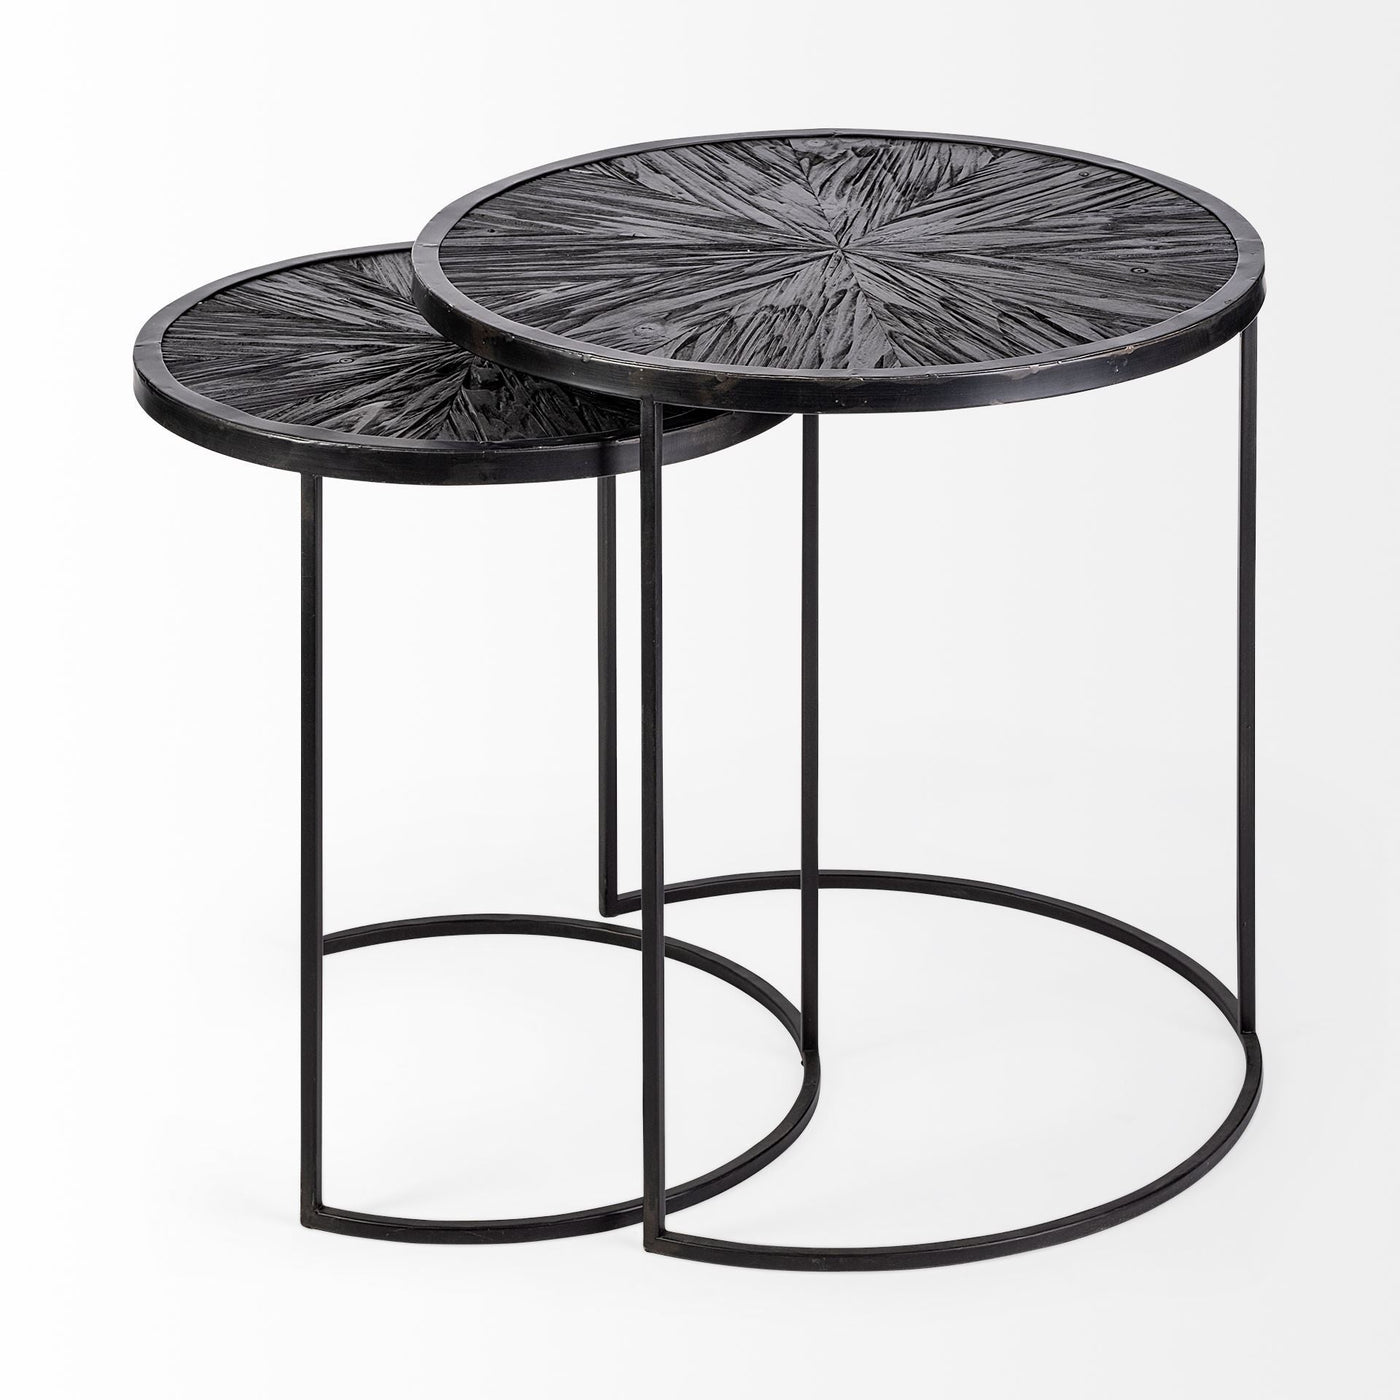 Set of Two 20’ Black Iron Round End Table - End-Side Tables